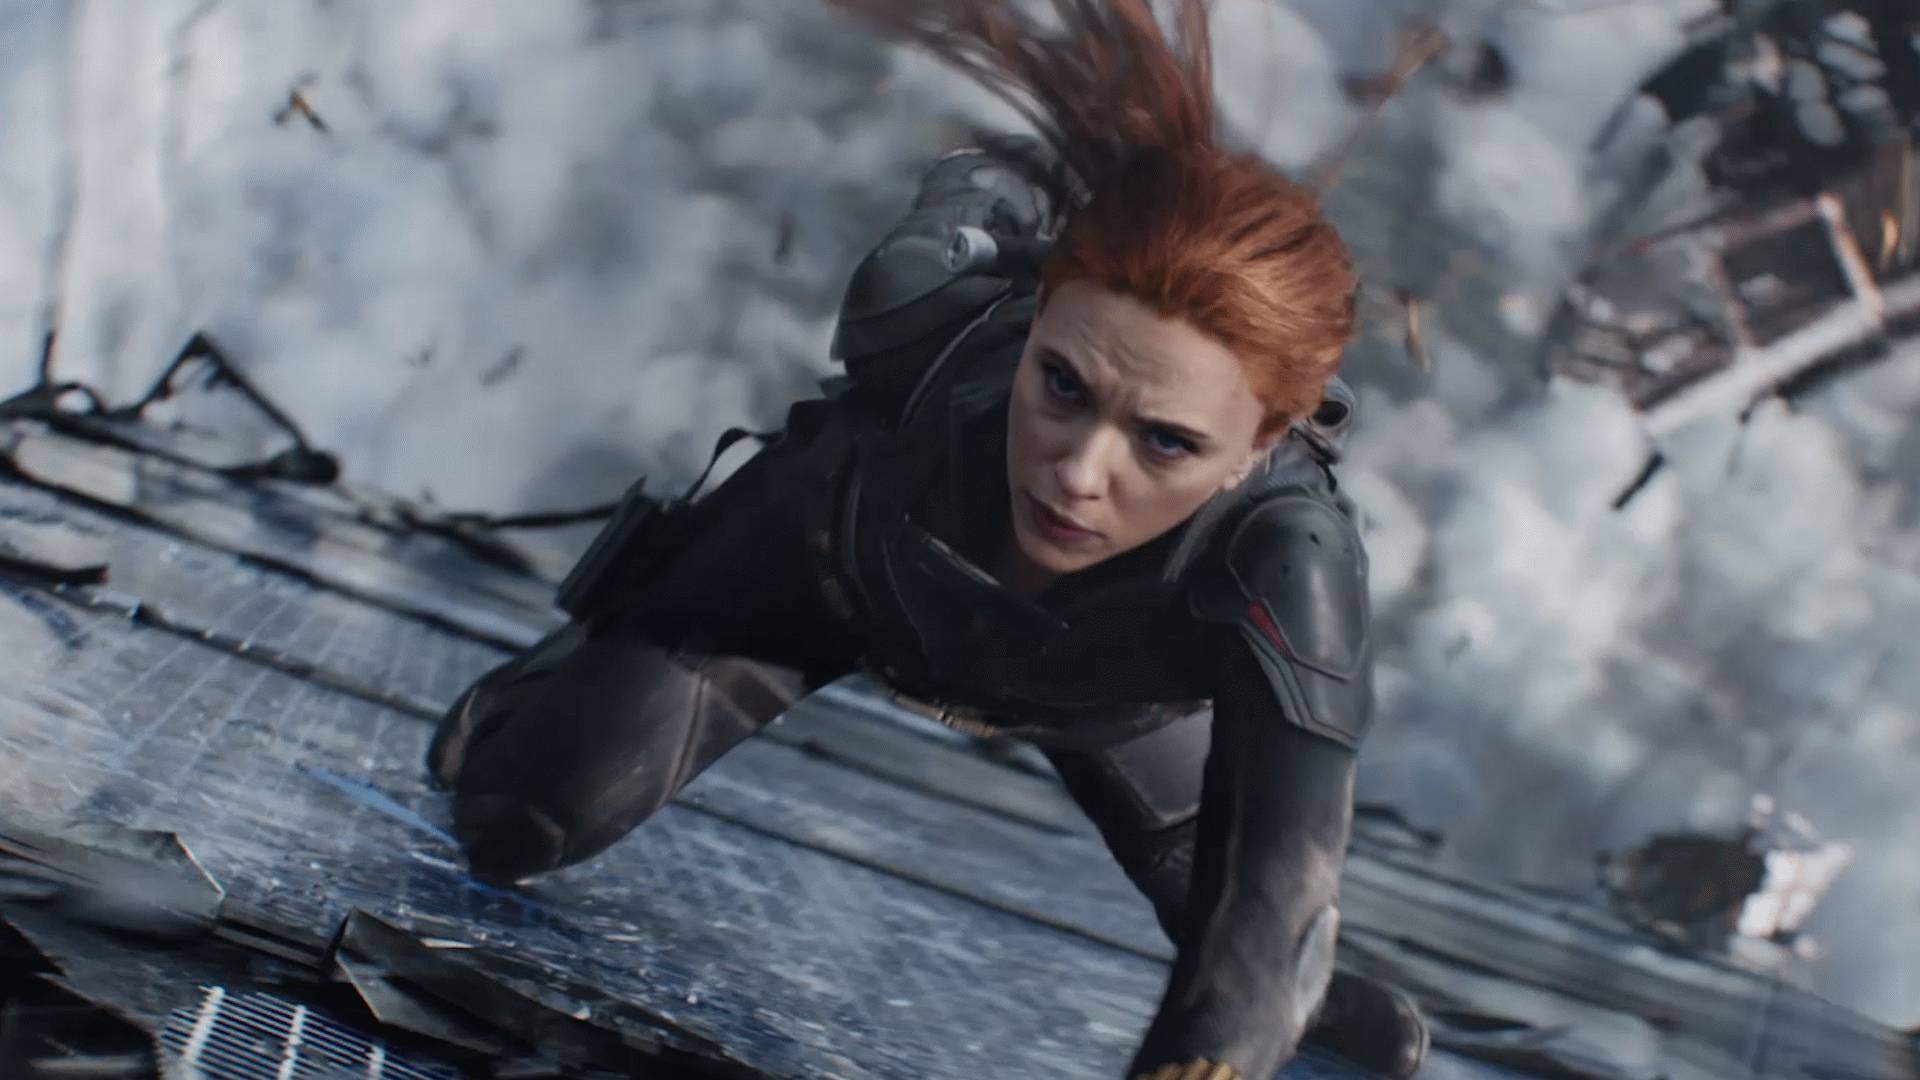 Black Widow image provide the first glimpse of O.T. Fagbenle's mysterious character